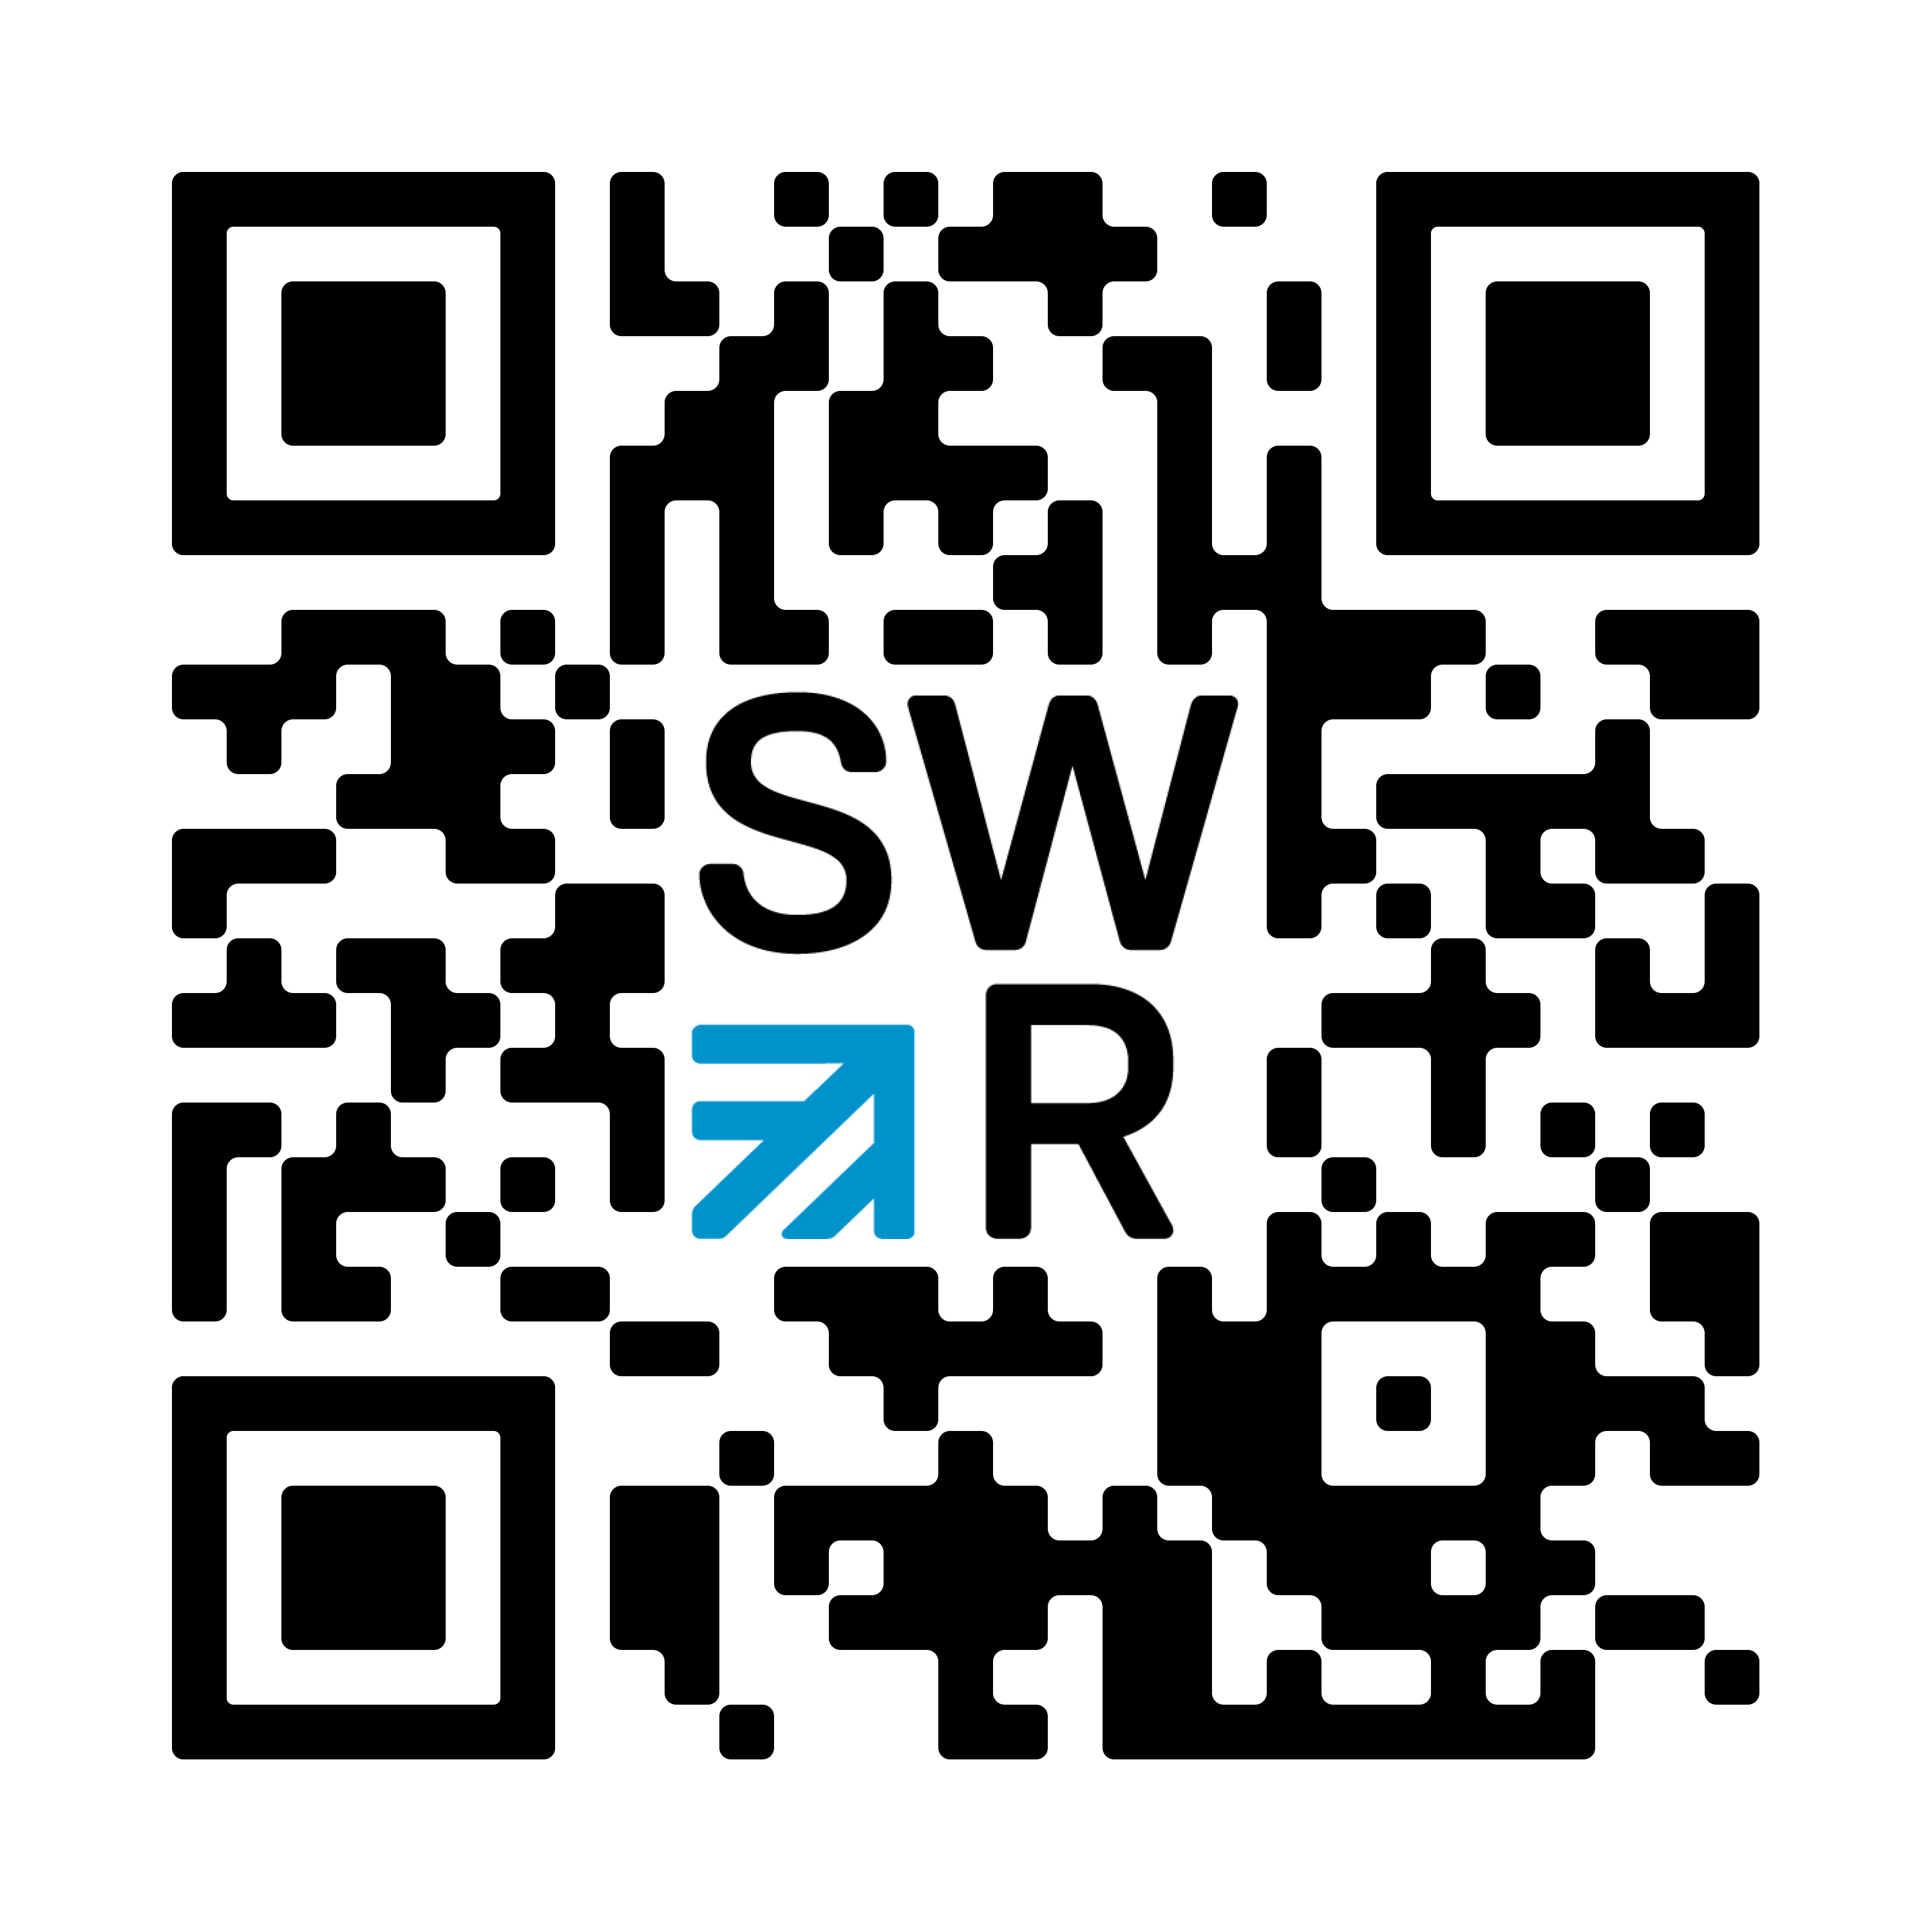 Image of the QR CODE